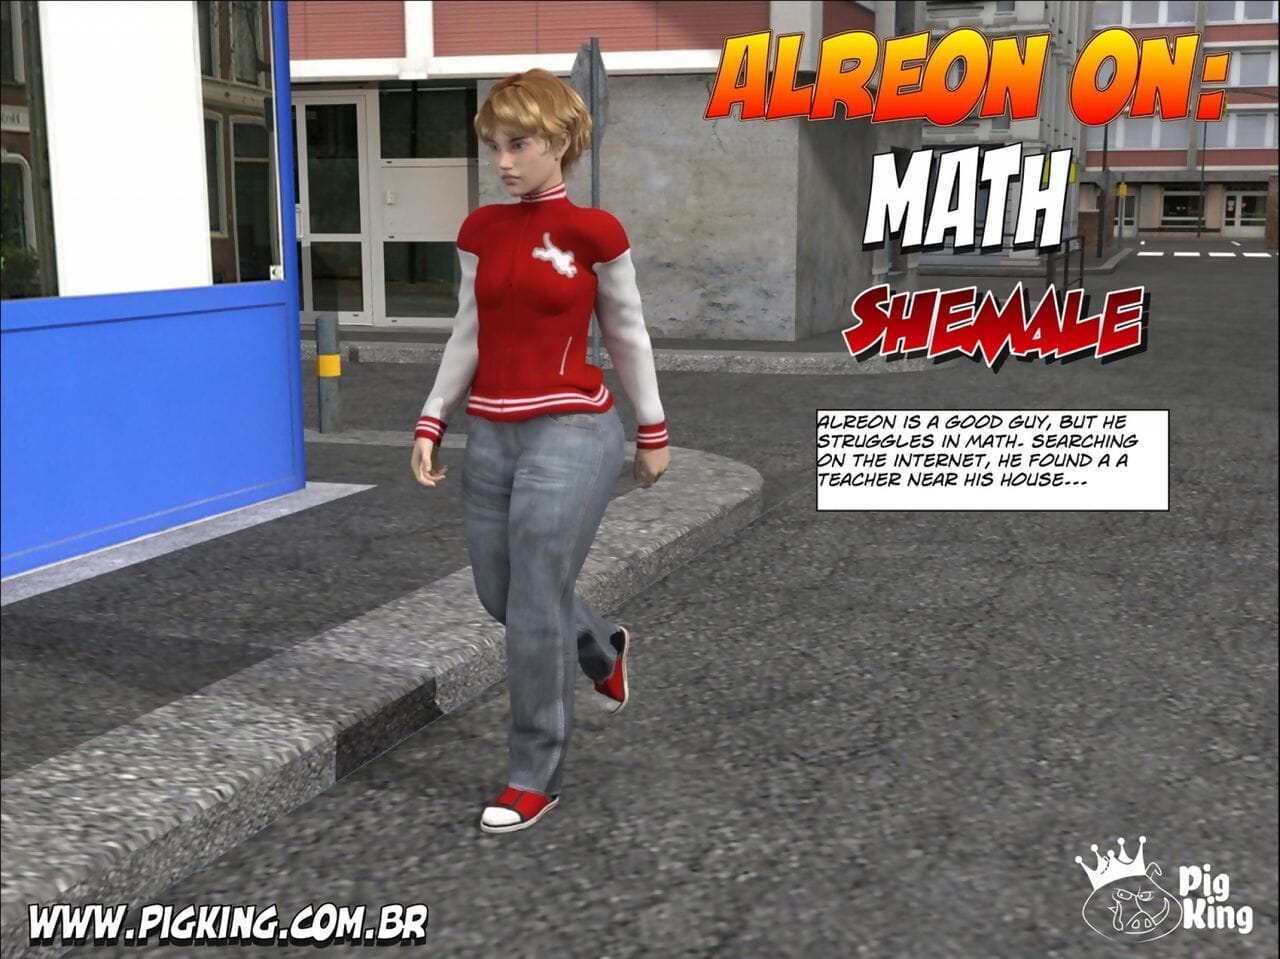 PigKing Alreon on - Math Shemale page 1